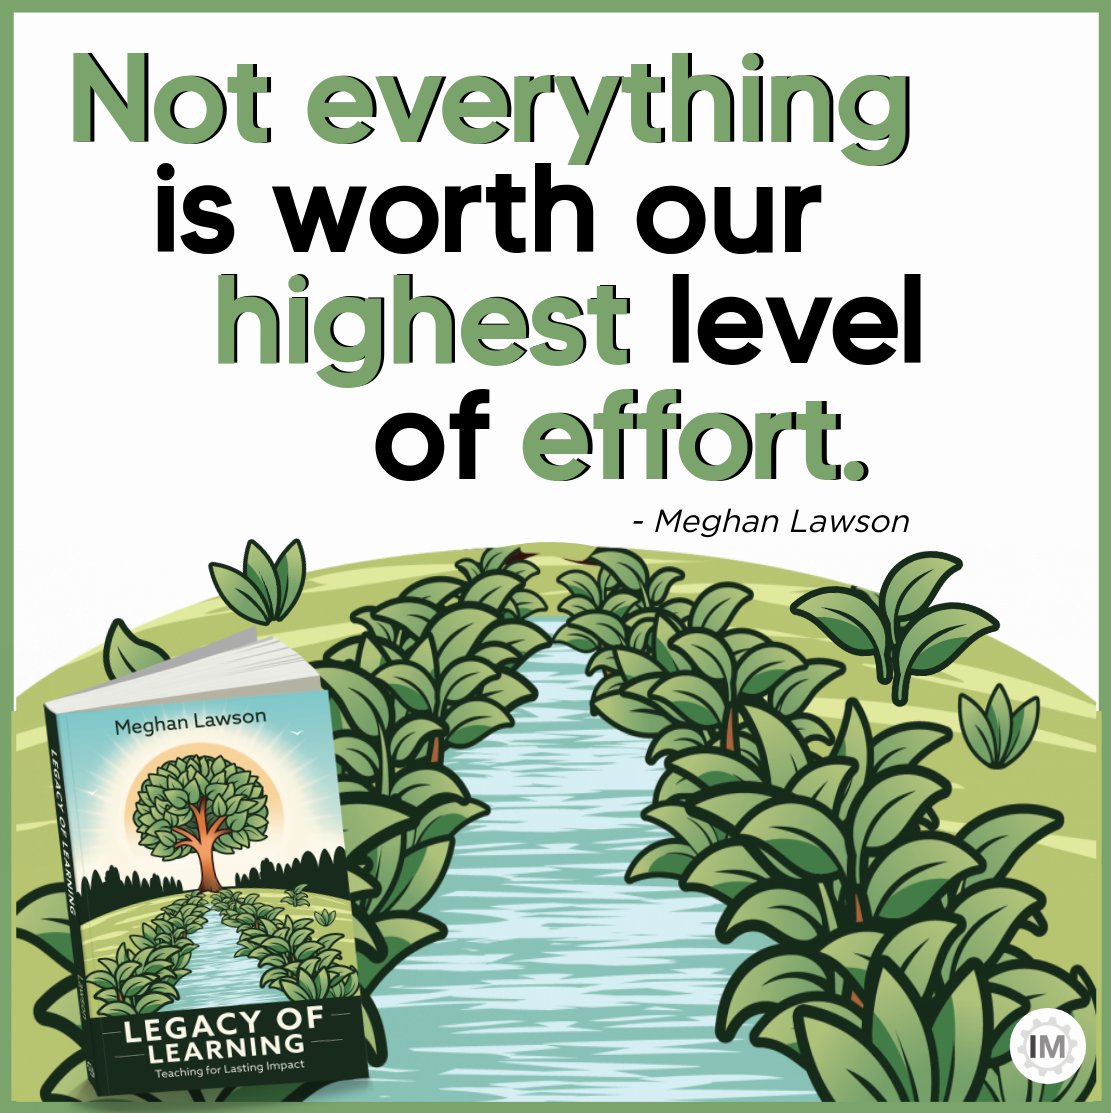 'Not everything is worth our highest level of effort!'
Thank you, Meghan Lawson + #LegacyOfLearning!🌳📗

Learn MORE Right HERE:
📖 amazon.com/Legacy-Learnin…

#tlap #dbcincbooks @Meghan_Lawson @TaraMartinEDU @burgessdave @dbc_inc @gcouros @PaigeCouros #IMpress